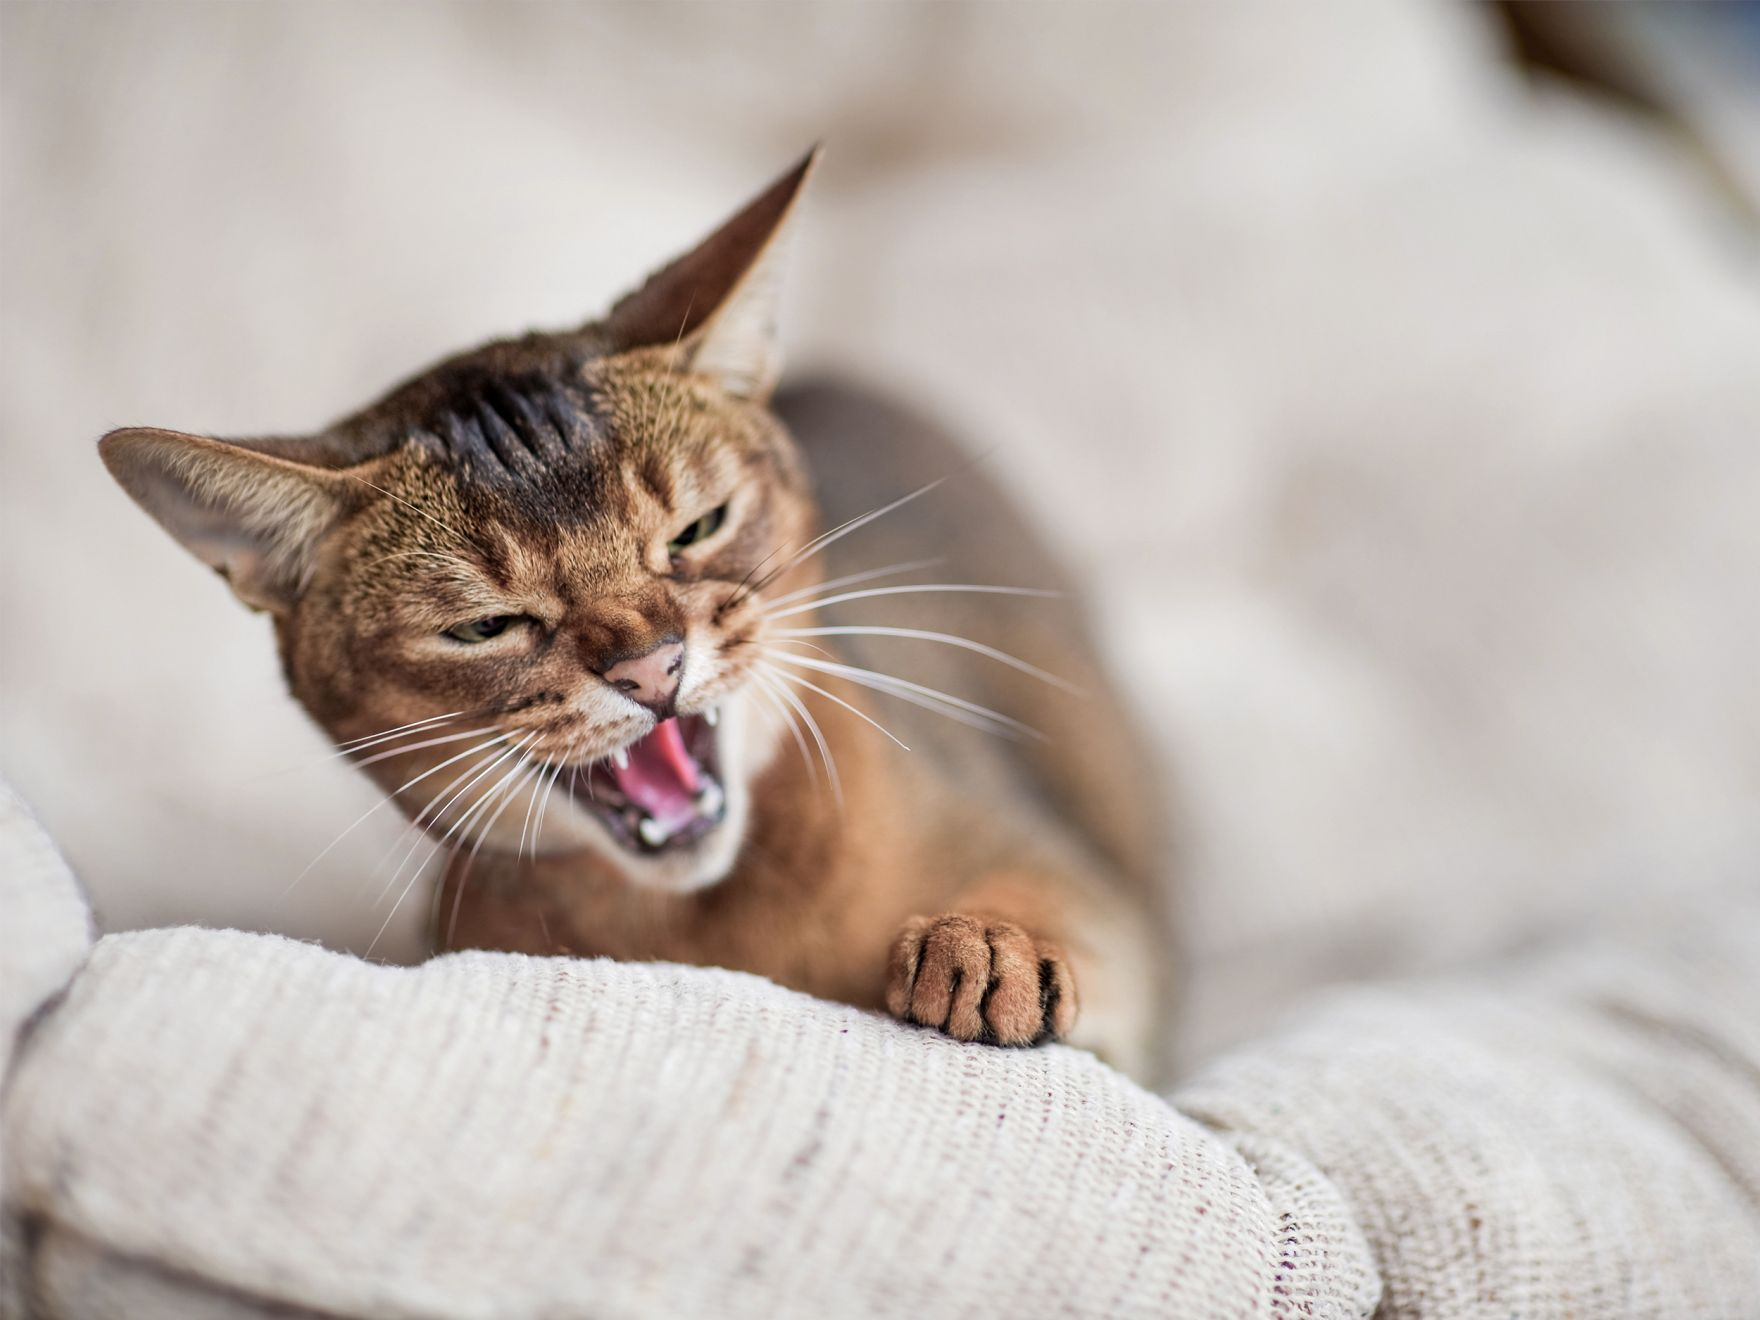 Cat with open mouth